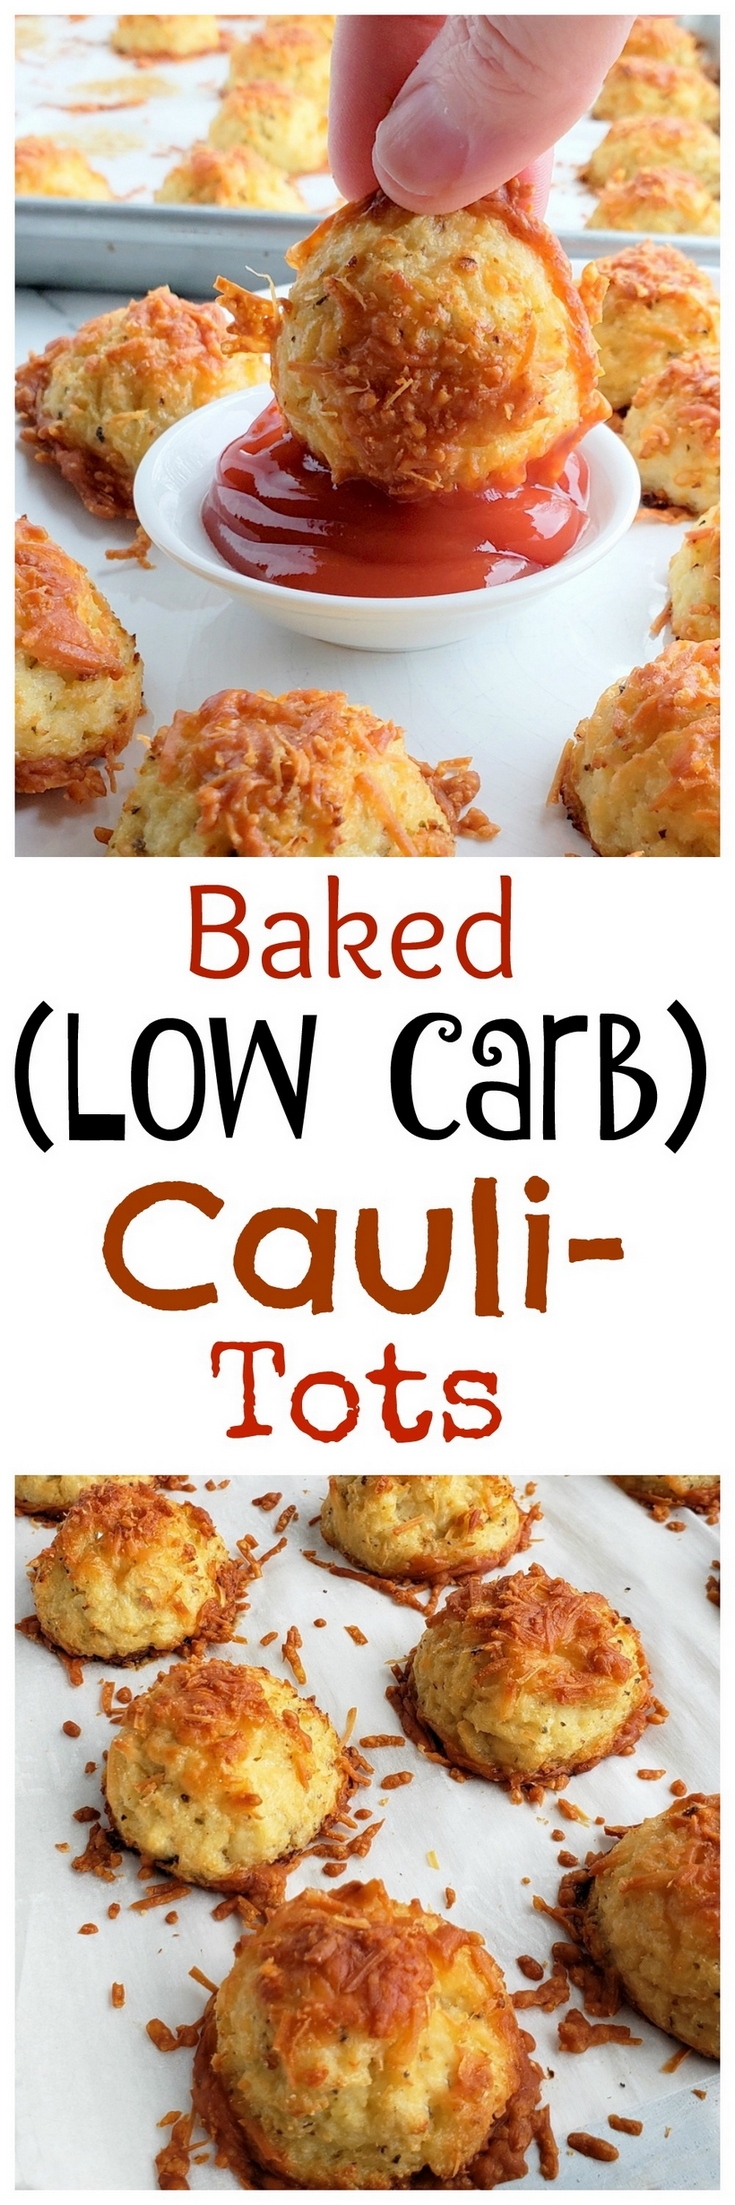 Crispy, cheesy and tasty, these Baked (Low Carb) Parmesan Cauli-Tots are the answer to a healthy dinner side dish everyone in the family will love. #noblepig #cauliflower #tatertots via @cmpollak1